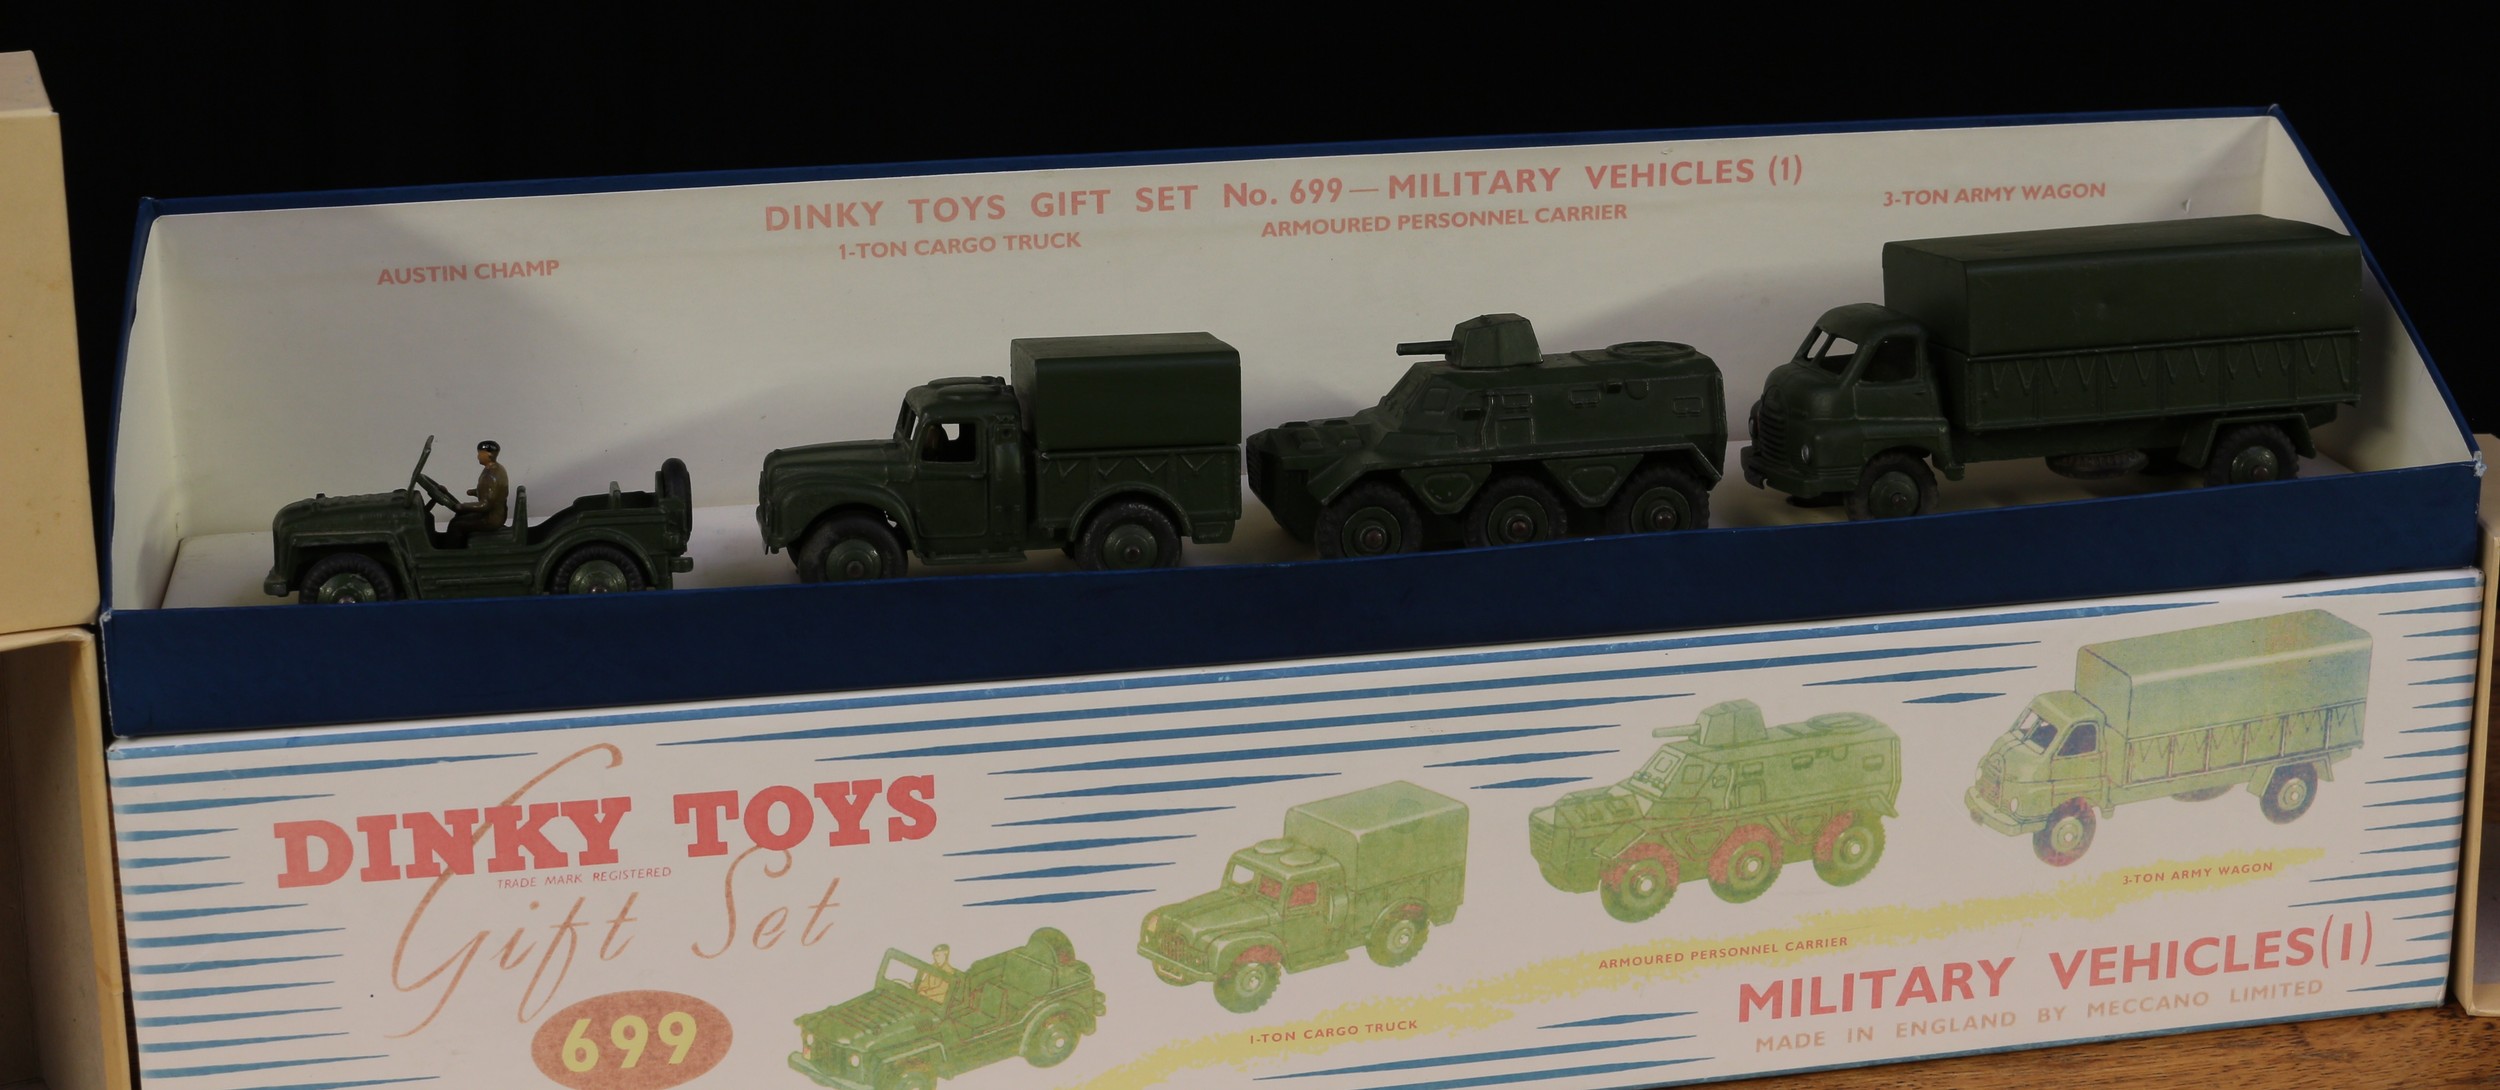 Dinky Toys Gift set 699, Military vehicles (1), comprising 621 3-ton army wagon; 641 1-ton cargo - Image 2 of 2